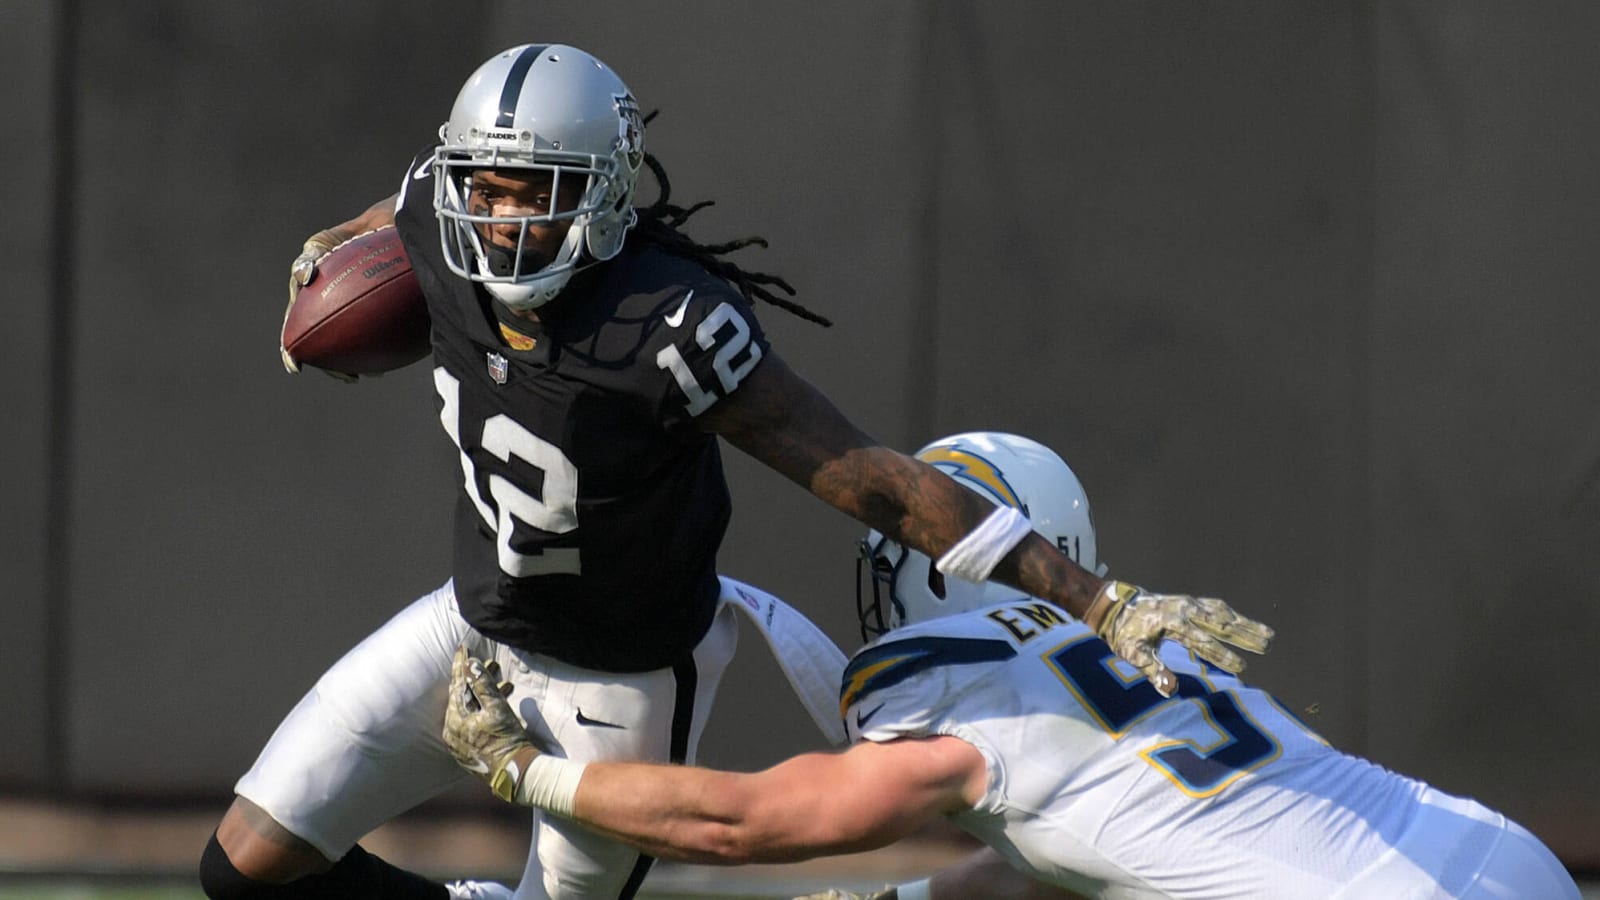 &#39;Showing More and More!&#39; Cowboys Plans for Martavis Bryant?